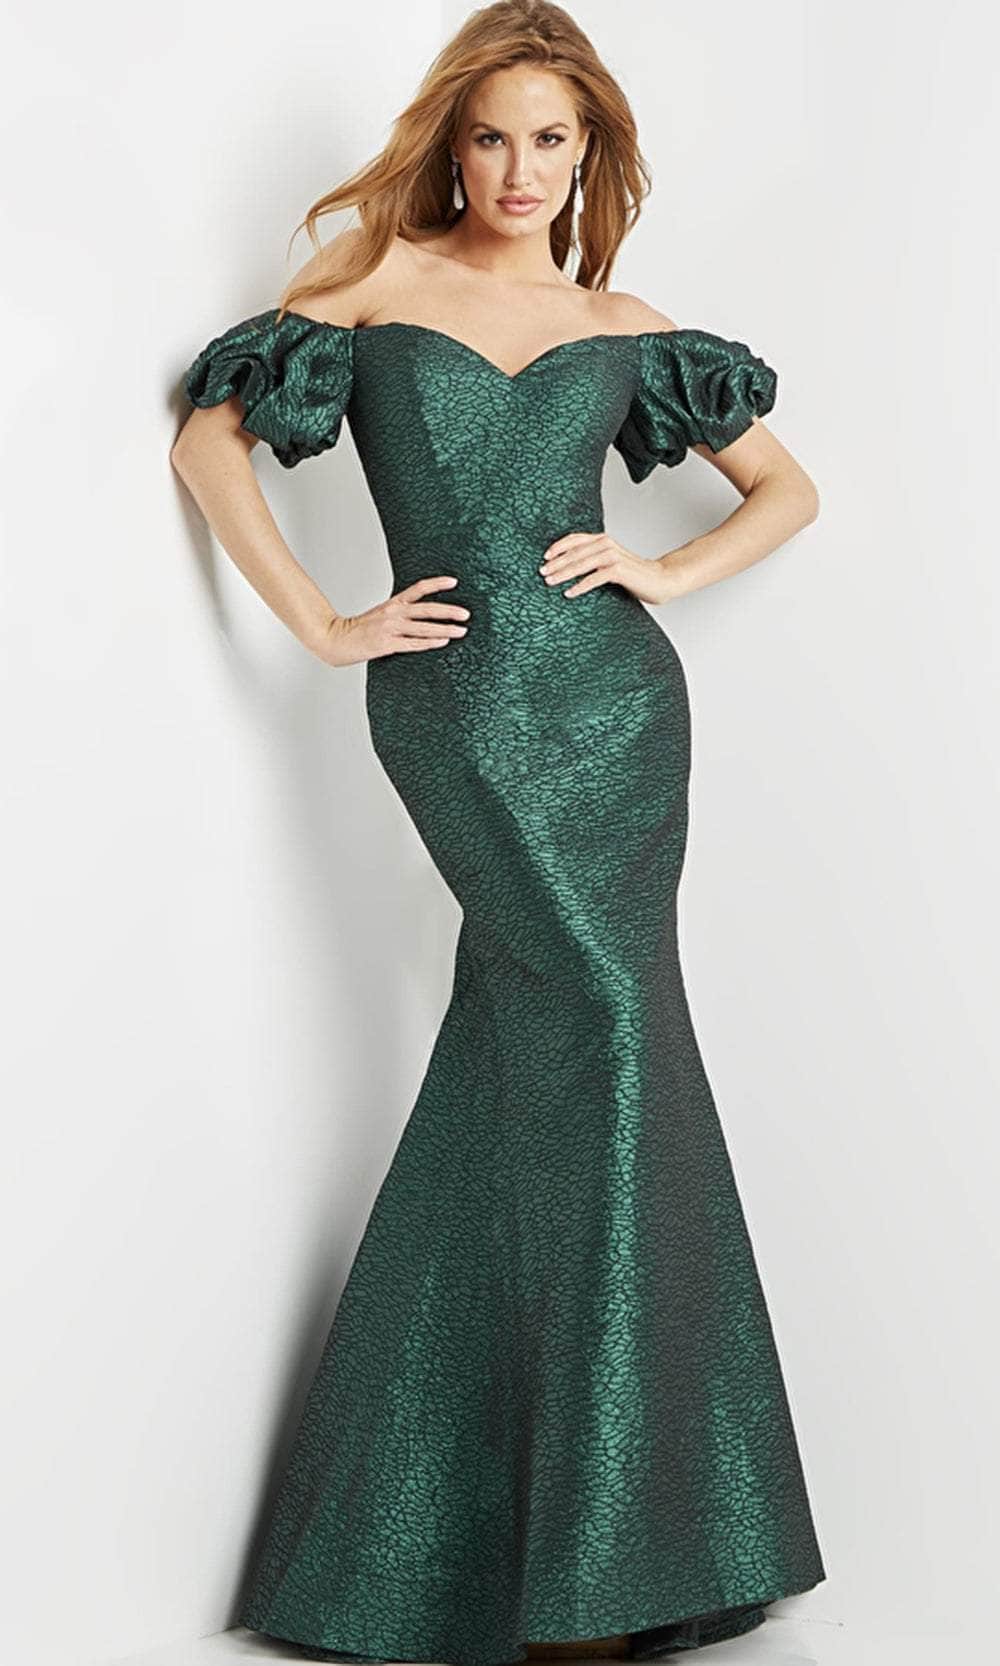 Image of Jovani 24044 - Puff Sleeve Off-Shoulder Evening Gown